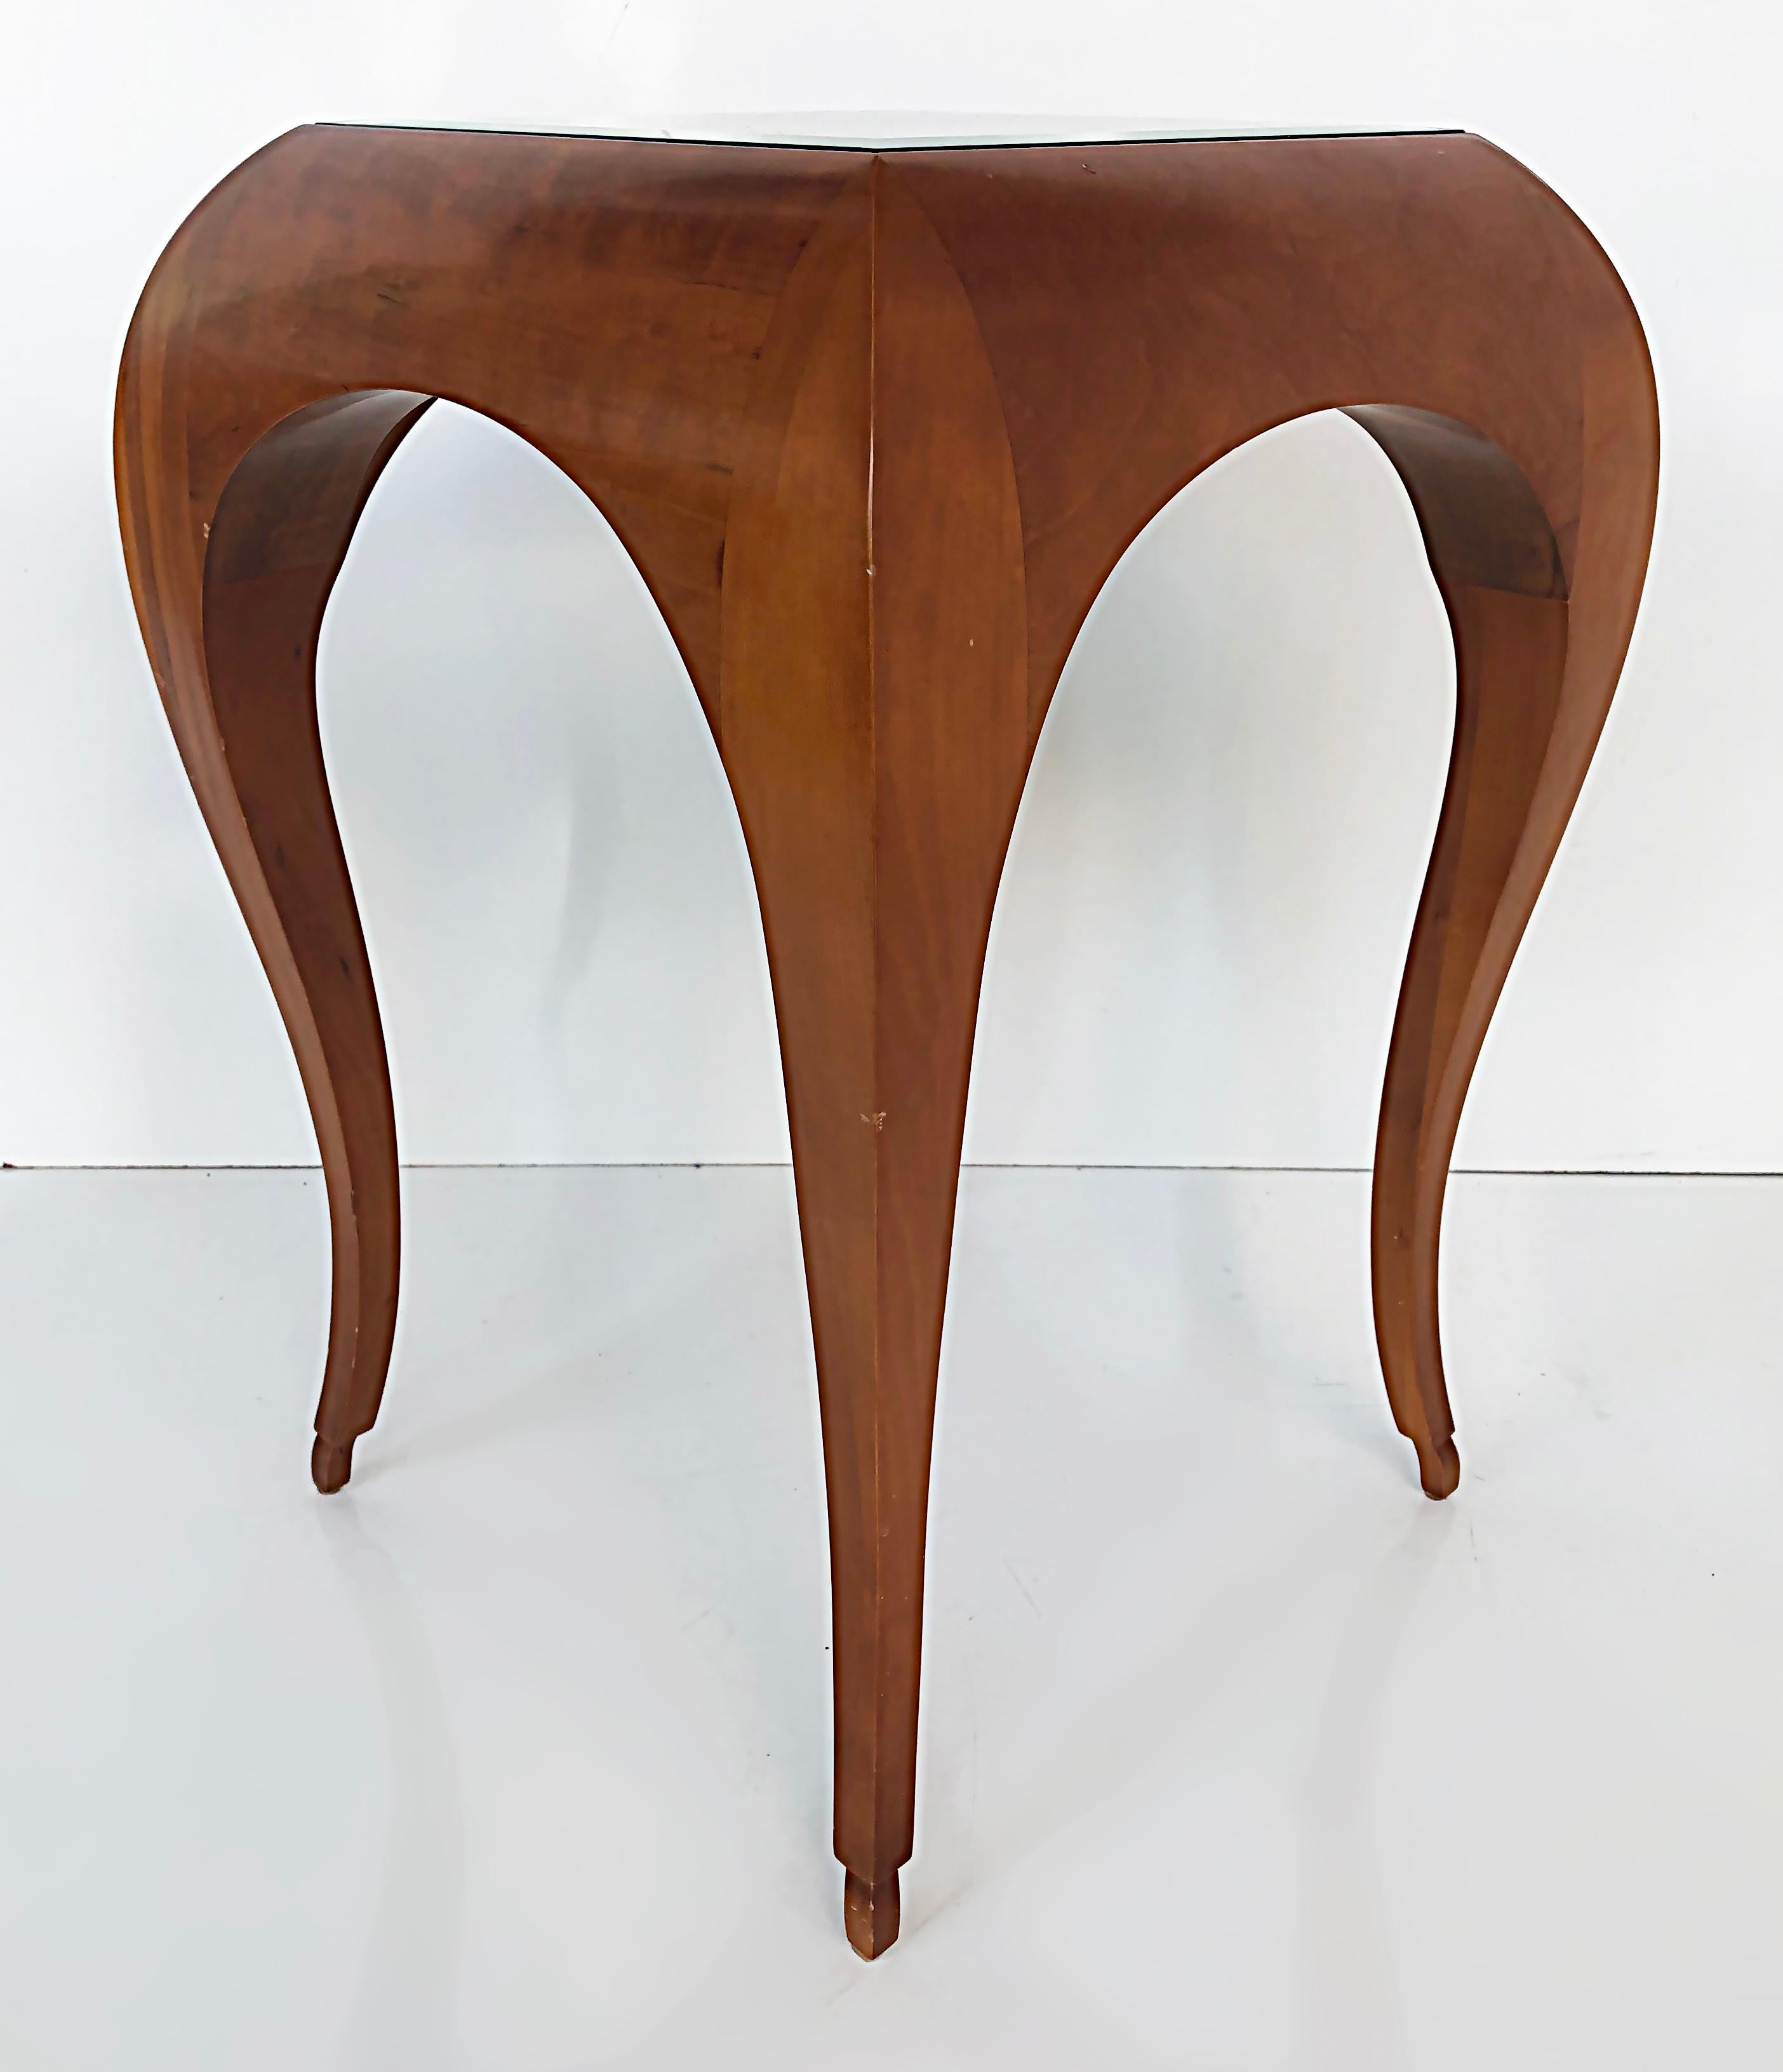 American Stylized Curved Wood Side Tables, Manner of René Prou